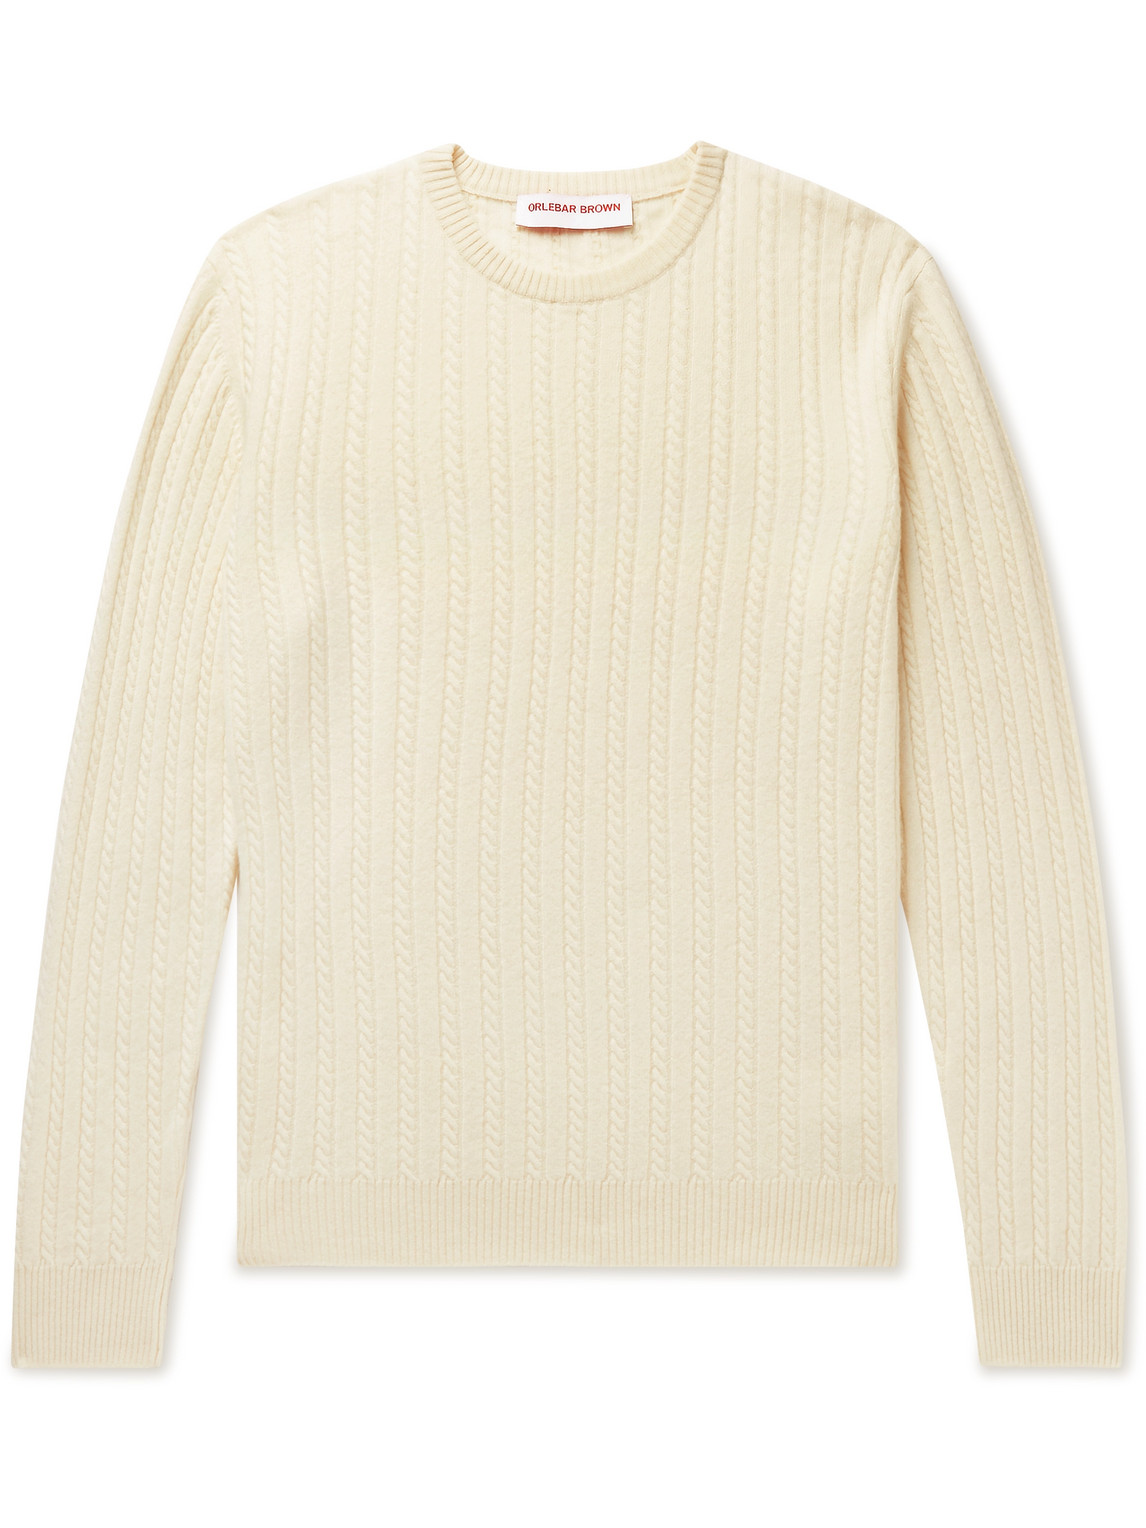 Orlebar Brown Walden Cable-knit Merino Wool Sweater In White